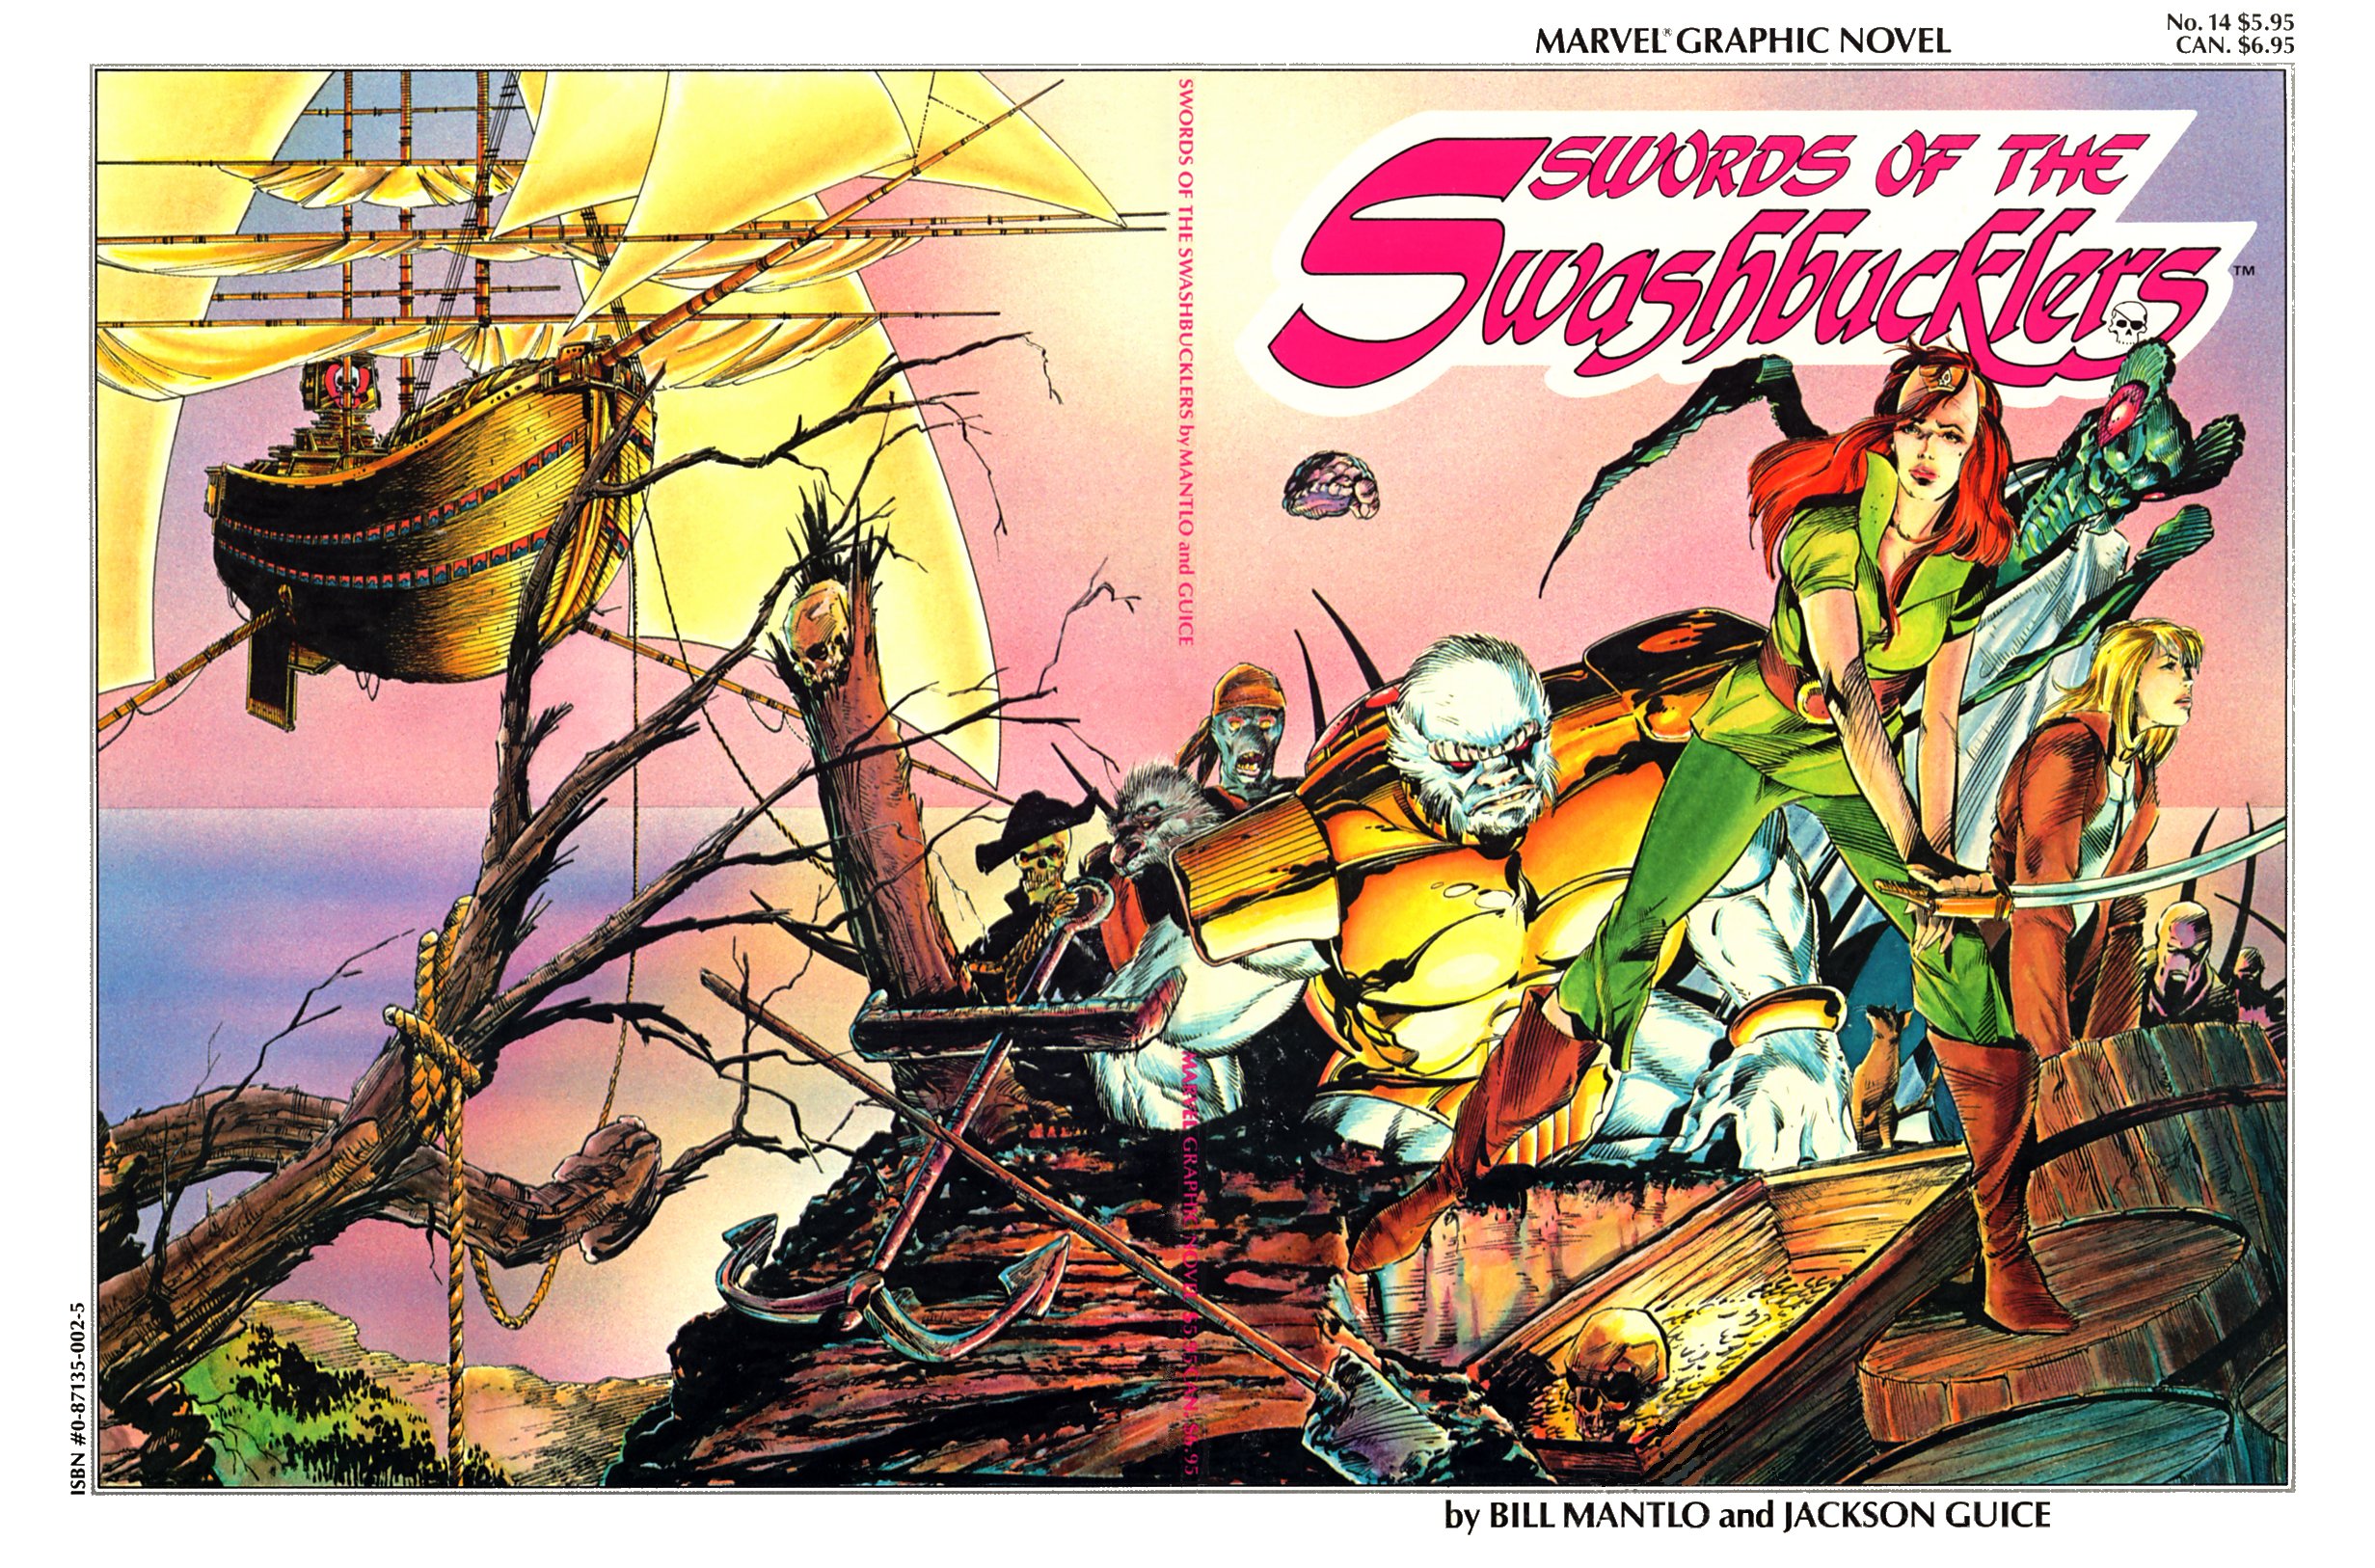 Read online Marvel Graphic Novel comic -  Issue #14 - Swords of the Swashbucklers - 2